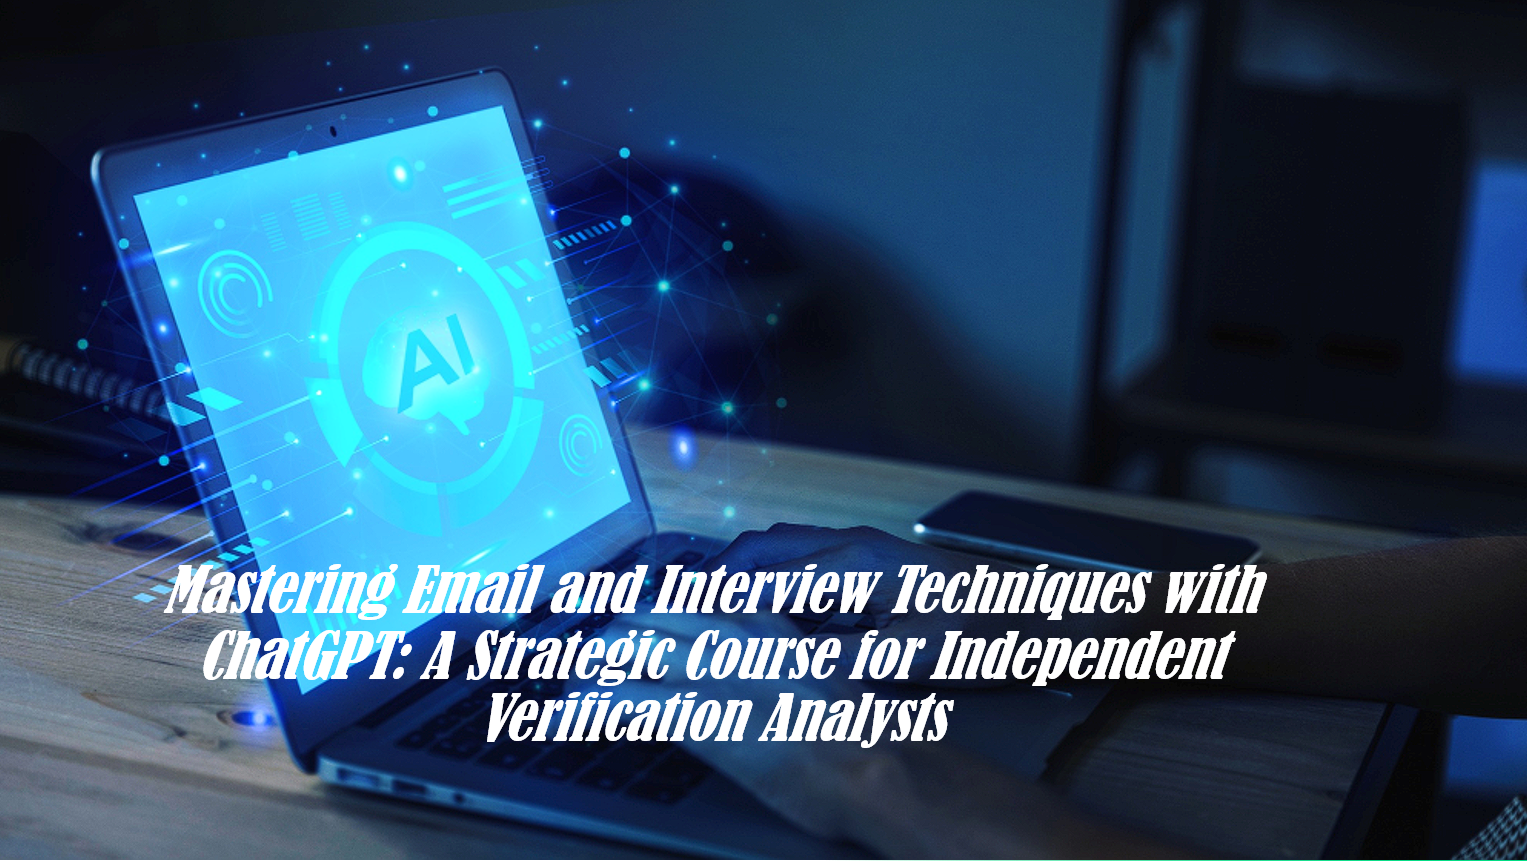 Mastering Email and Interview Techniques with ChatGPT: A Strategic Course for Independent Verification Analysts